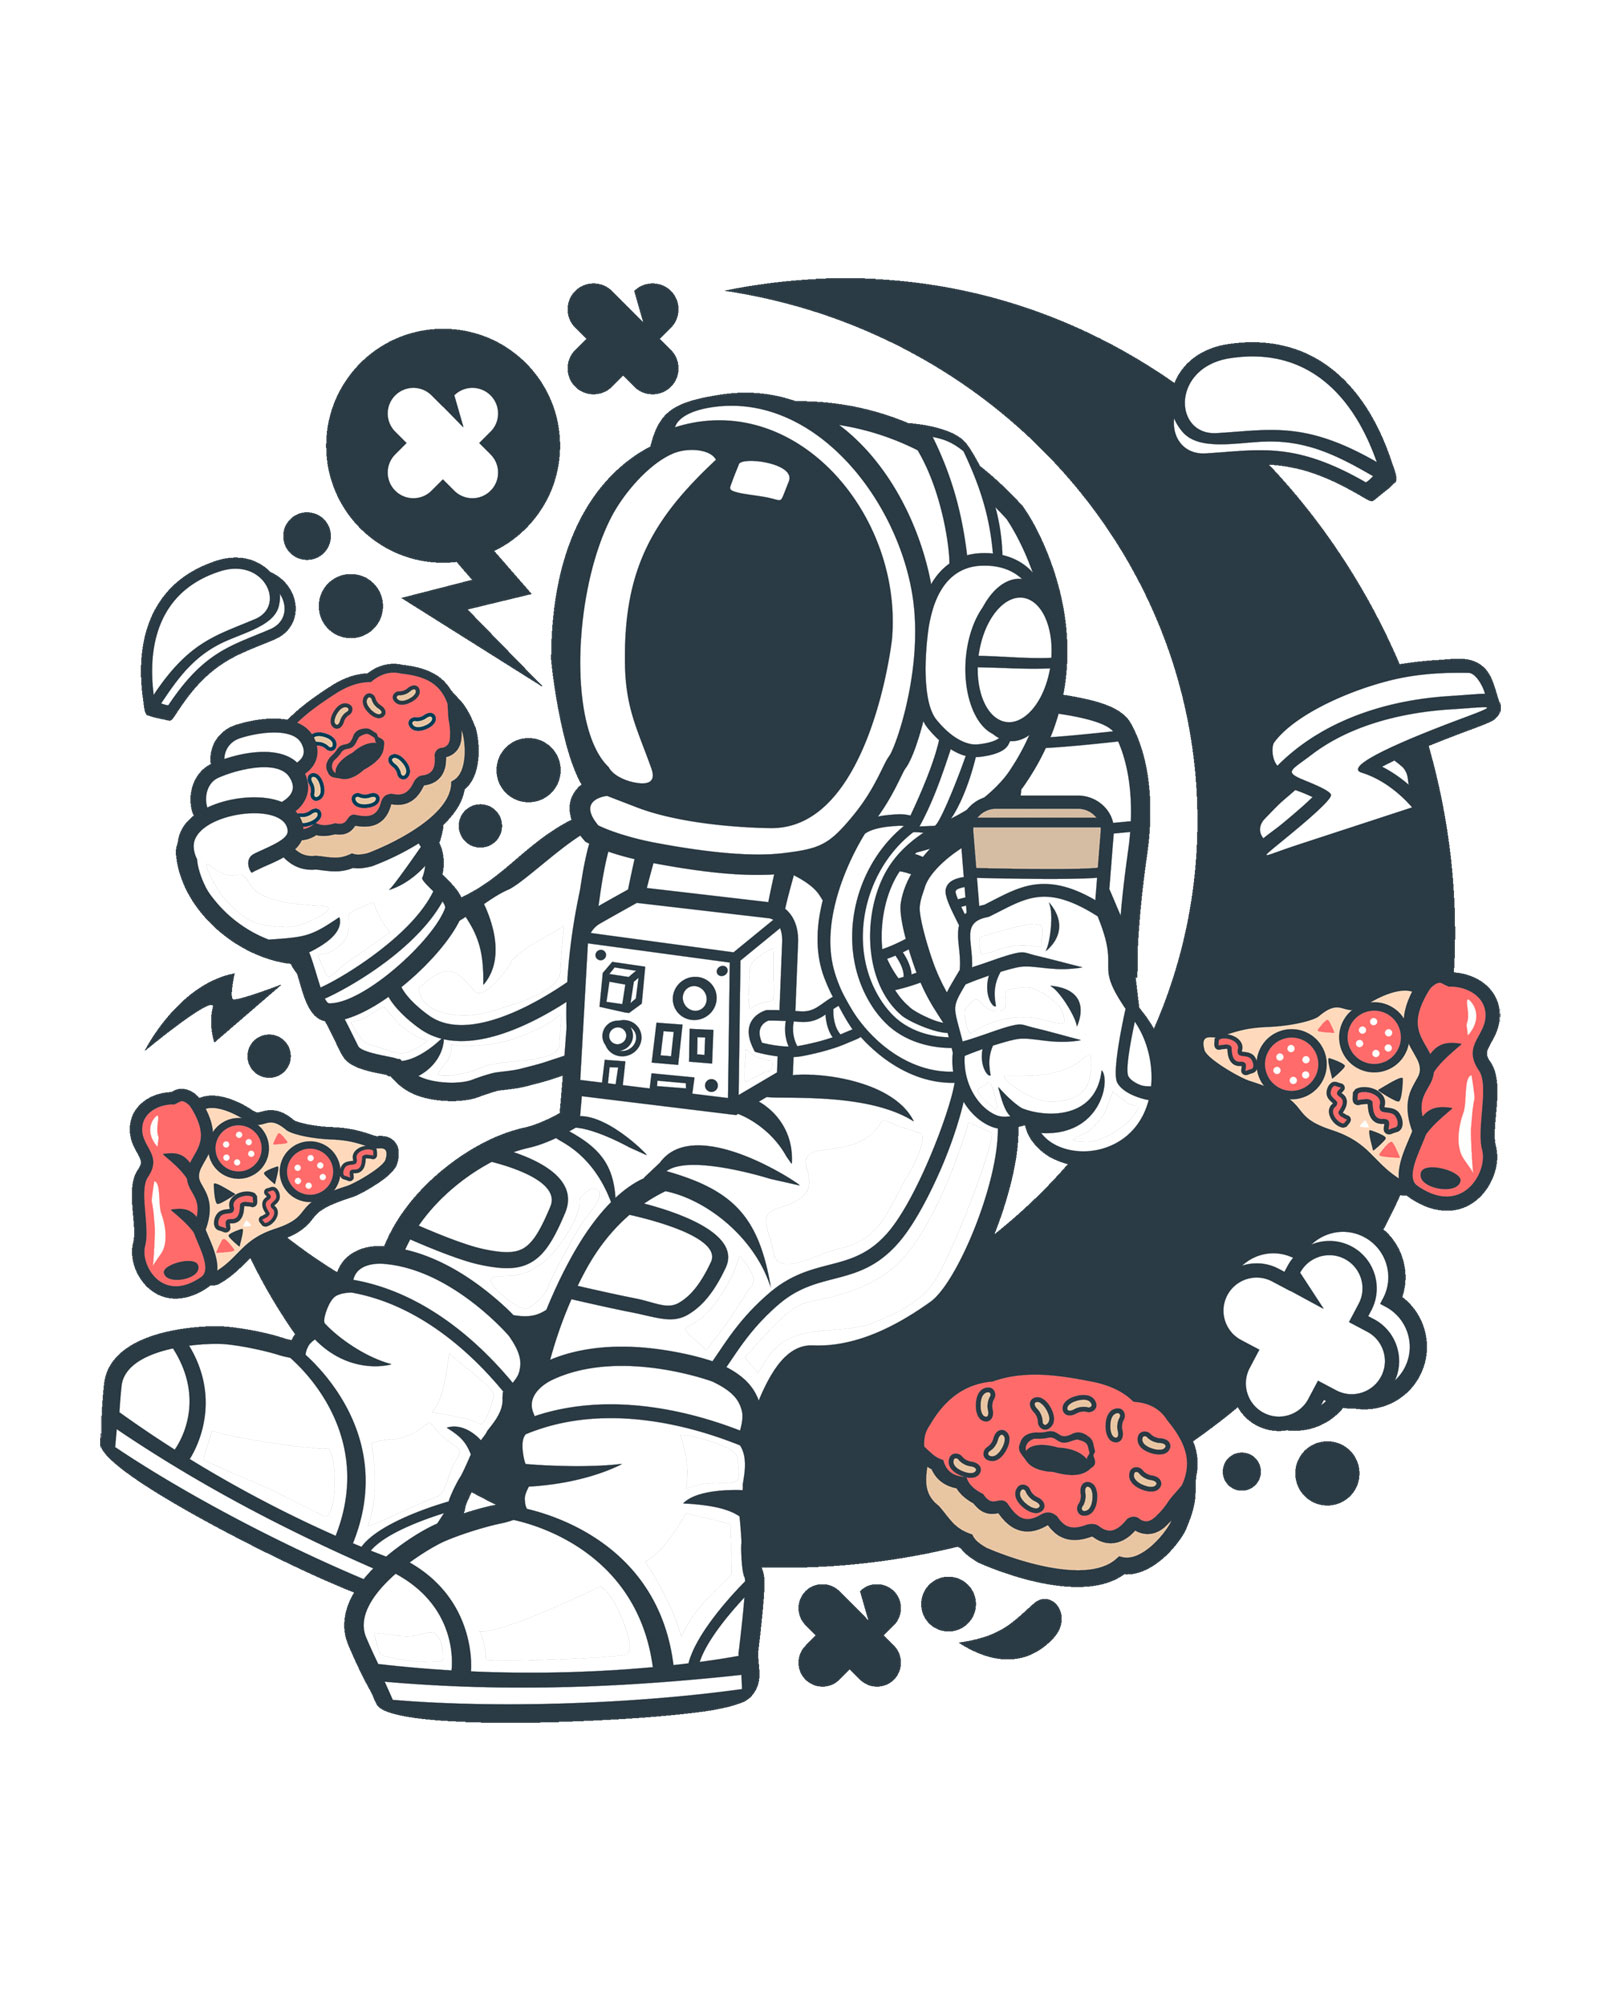 Astronaut coffee and donuts | White